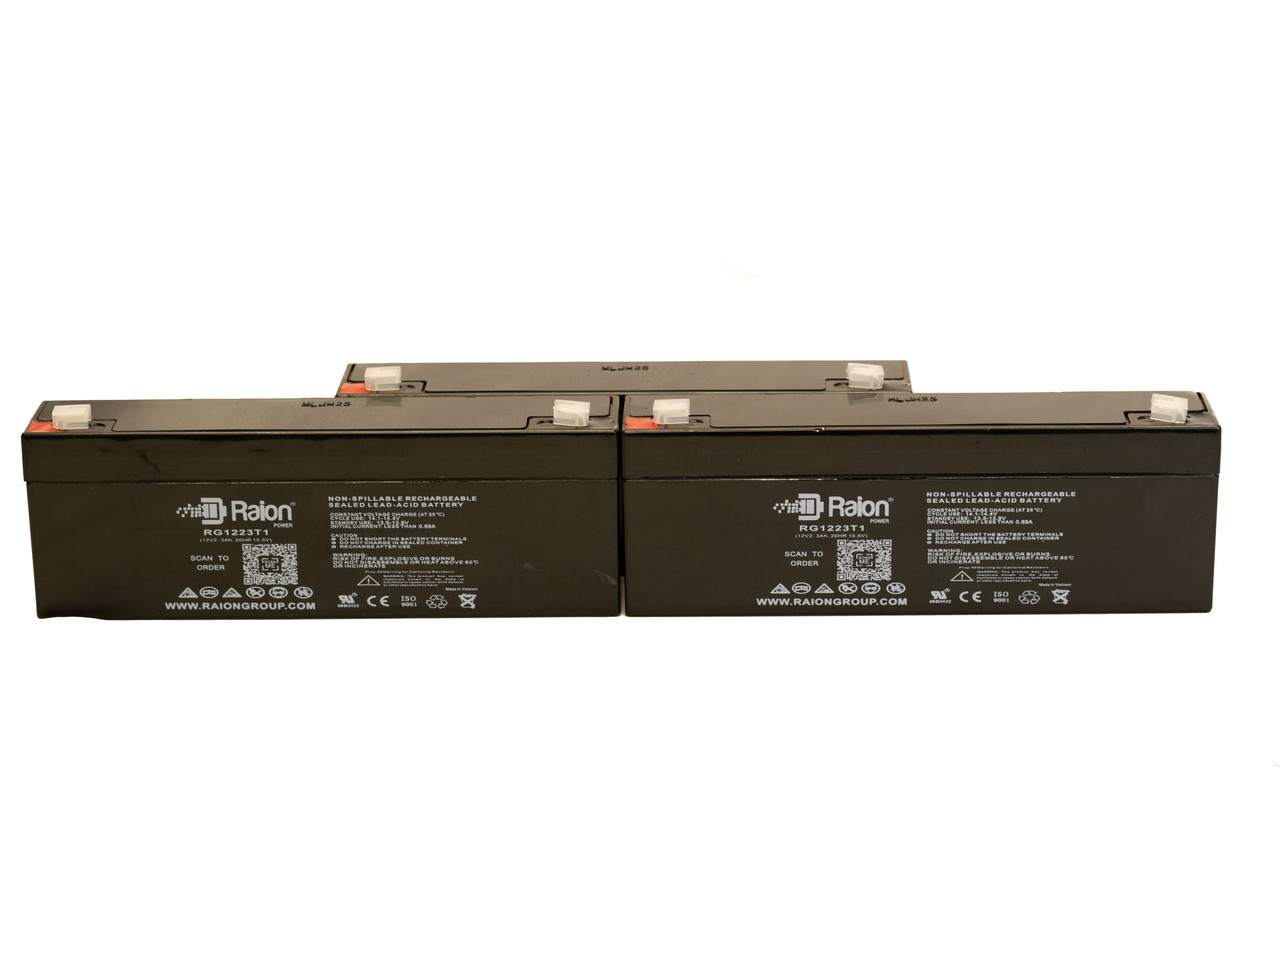 Raion Power 12V 2.3Ah RG1223T1 Replacement Medical Battery for Kontron 7501 Defibrillator - 3 Pack